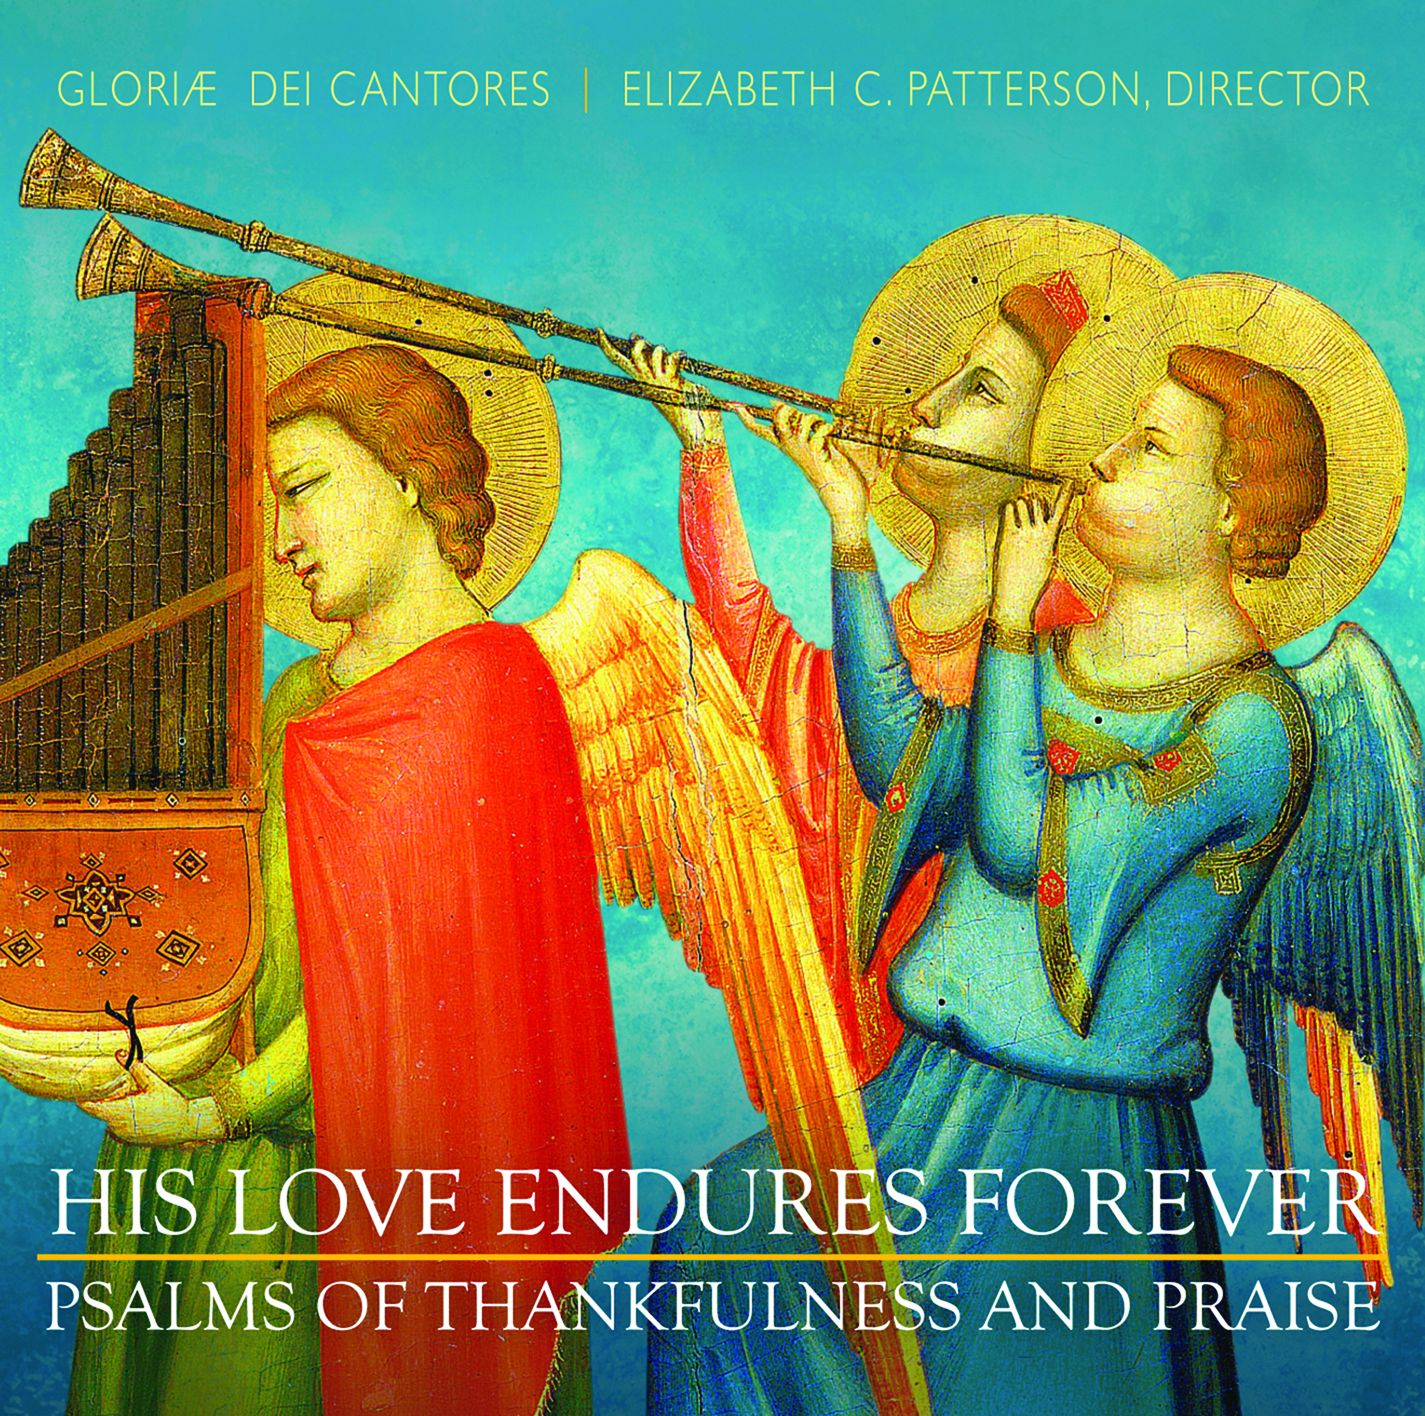 product image of 'His Love Endures' Gloriae Dei Cantores choral recording